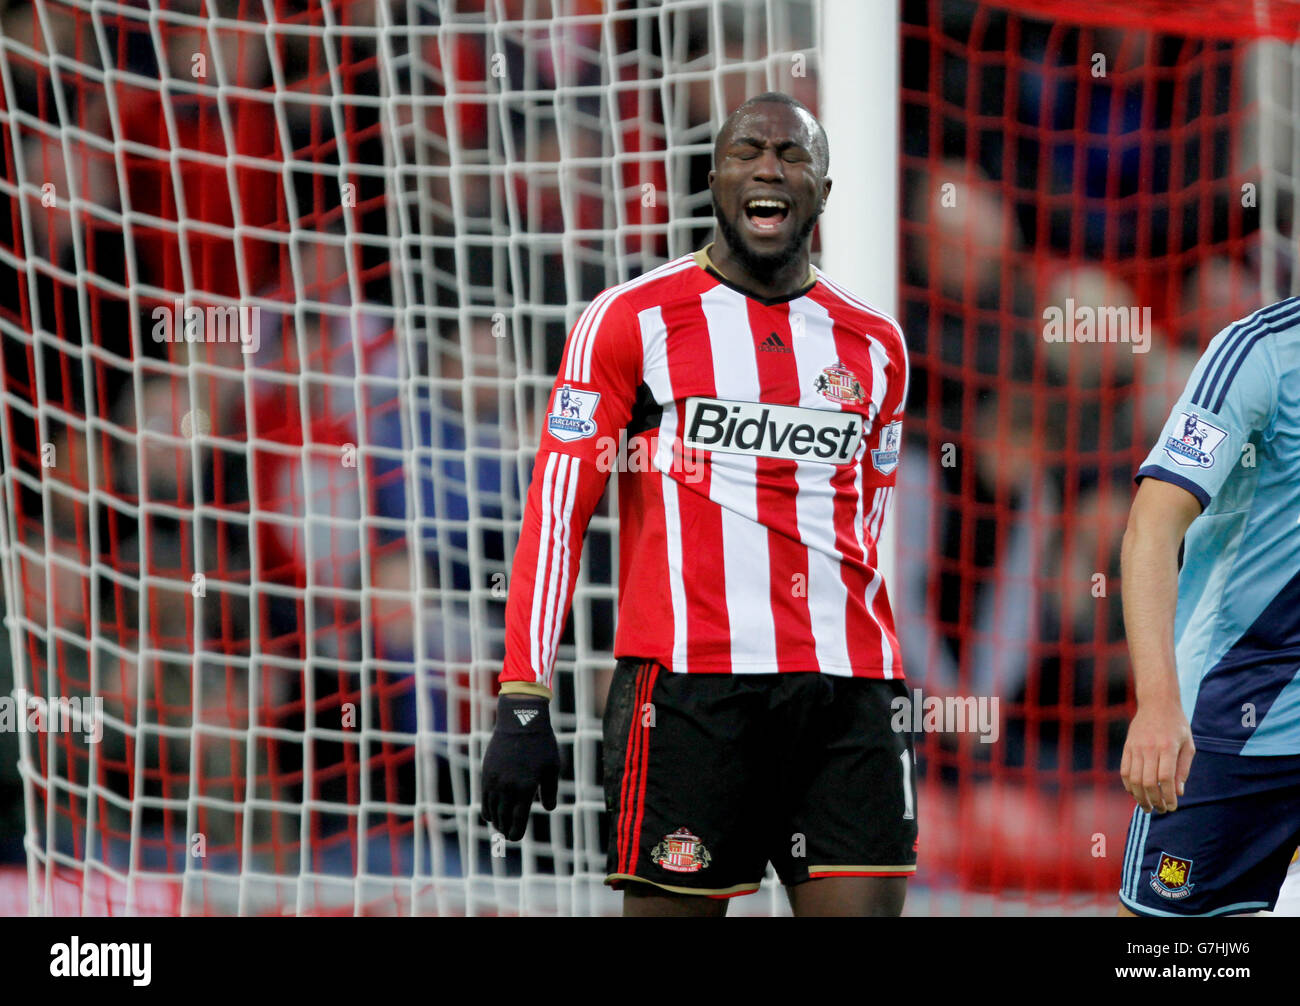 Sunderland's Jozy Altidore reacts after missing a chance during the Barclays Premier League match at the Stadium of Light, Sunderland. PRESS ASSOCIATION Photo. Picture date: Saturday December 13, 2014. See PA story SOCCER Sunderland. Photo credit should read Richard Sellers/PA Wire. Maximum 45 images during a match. No video emulation or promotion as 'live'. No use in games, competitions, merchandise, betting or single club/player services. No use with unofficial audio, video, data, fixtures or club/league logos. Stock Photo